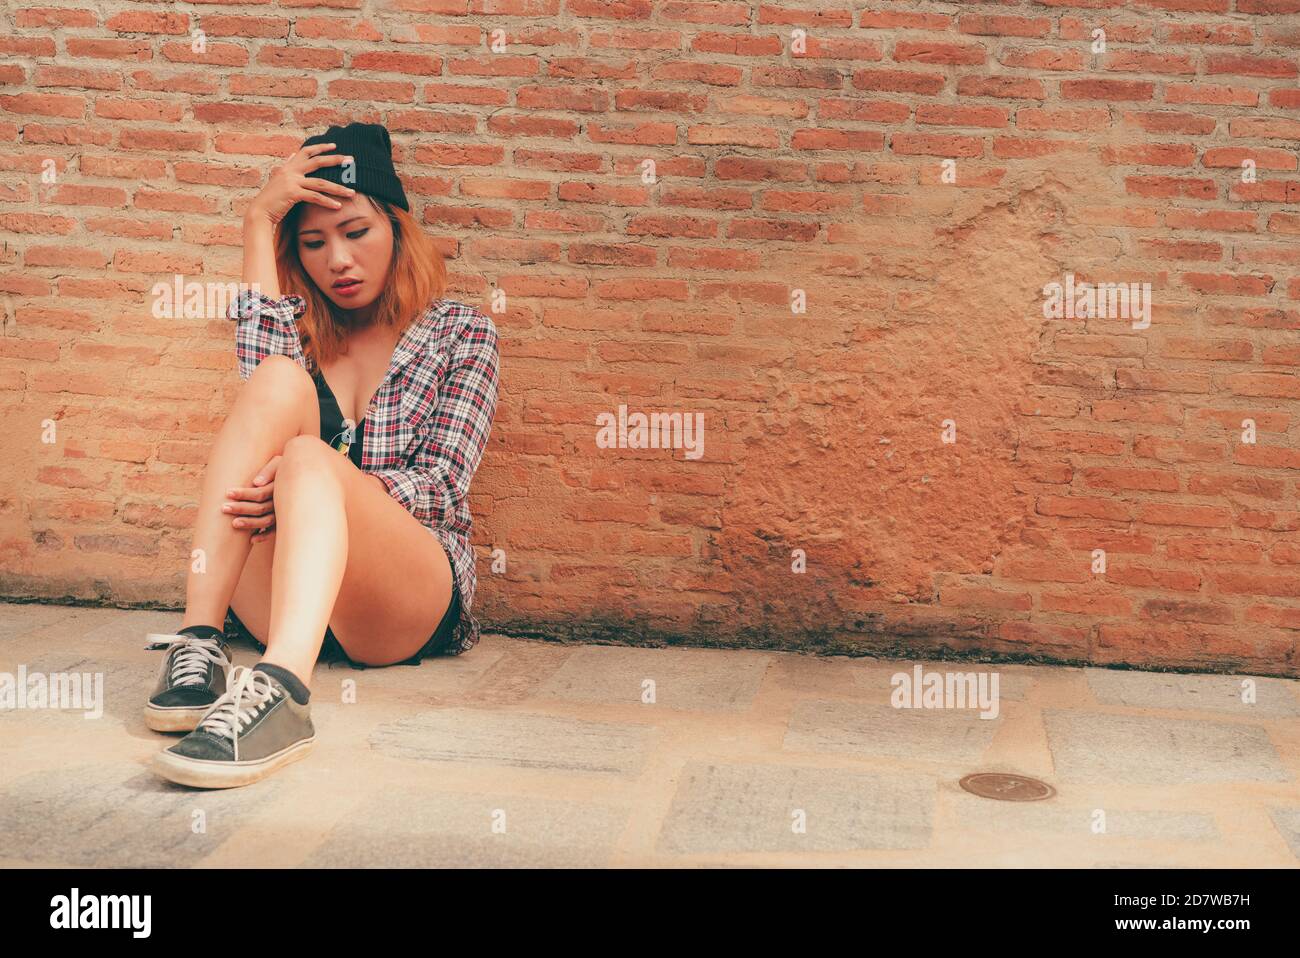 Depressed teenage woman feeling sad alone against brick wall in old town. Education and family failure concept. Stock Photo